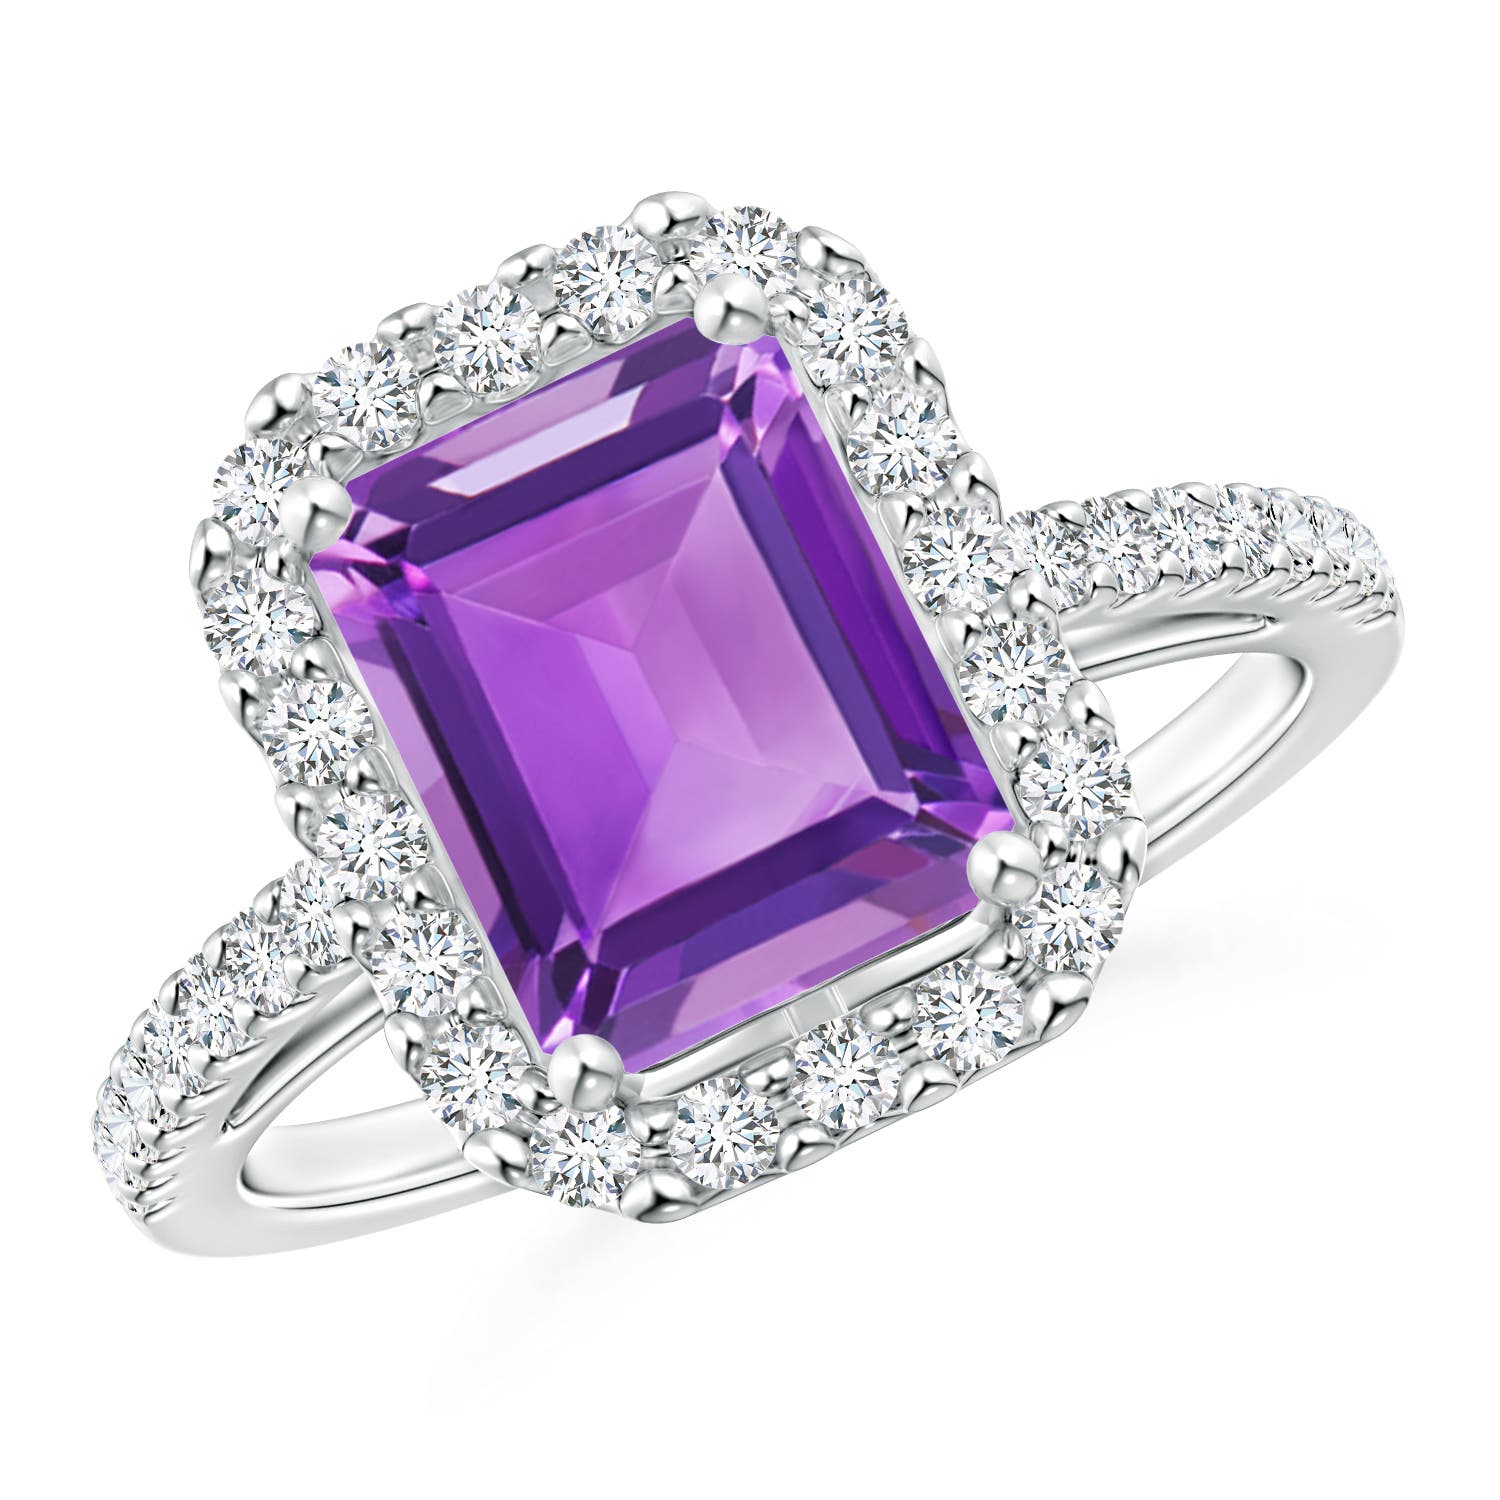 AA - Amethyst / 2.68 CT / 14 KT White Gold